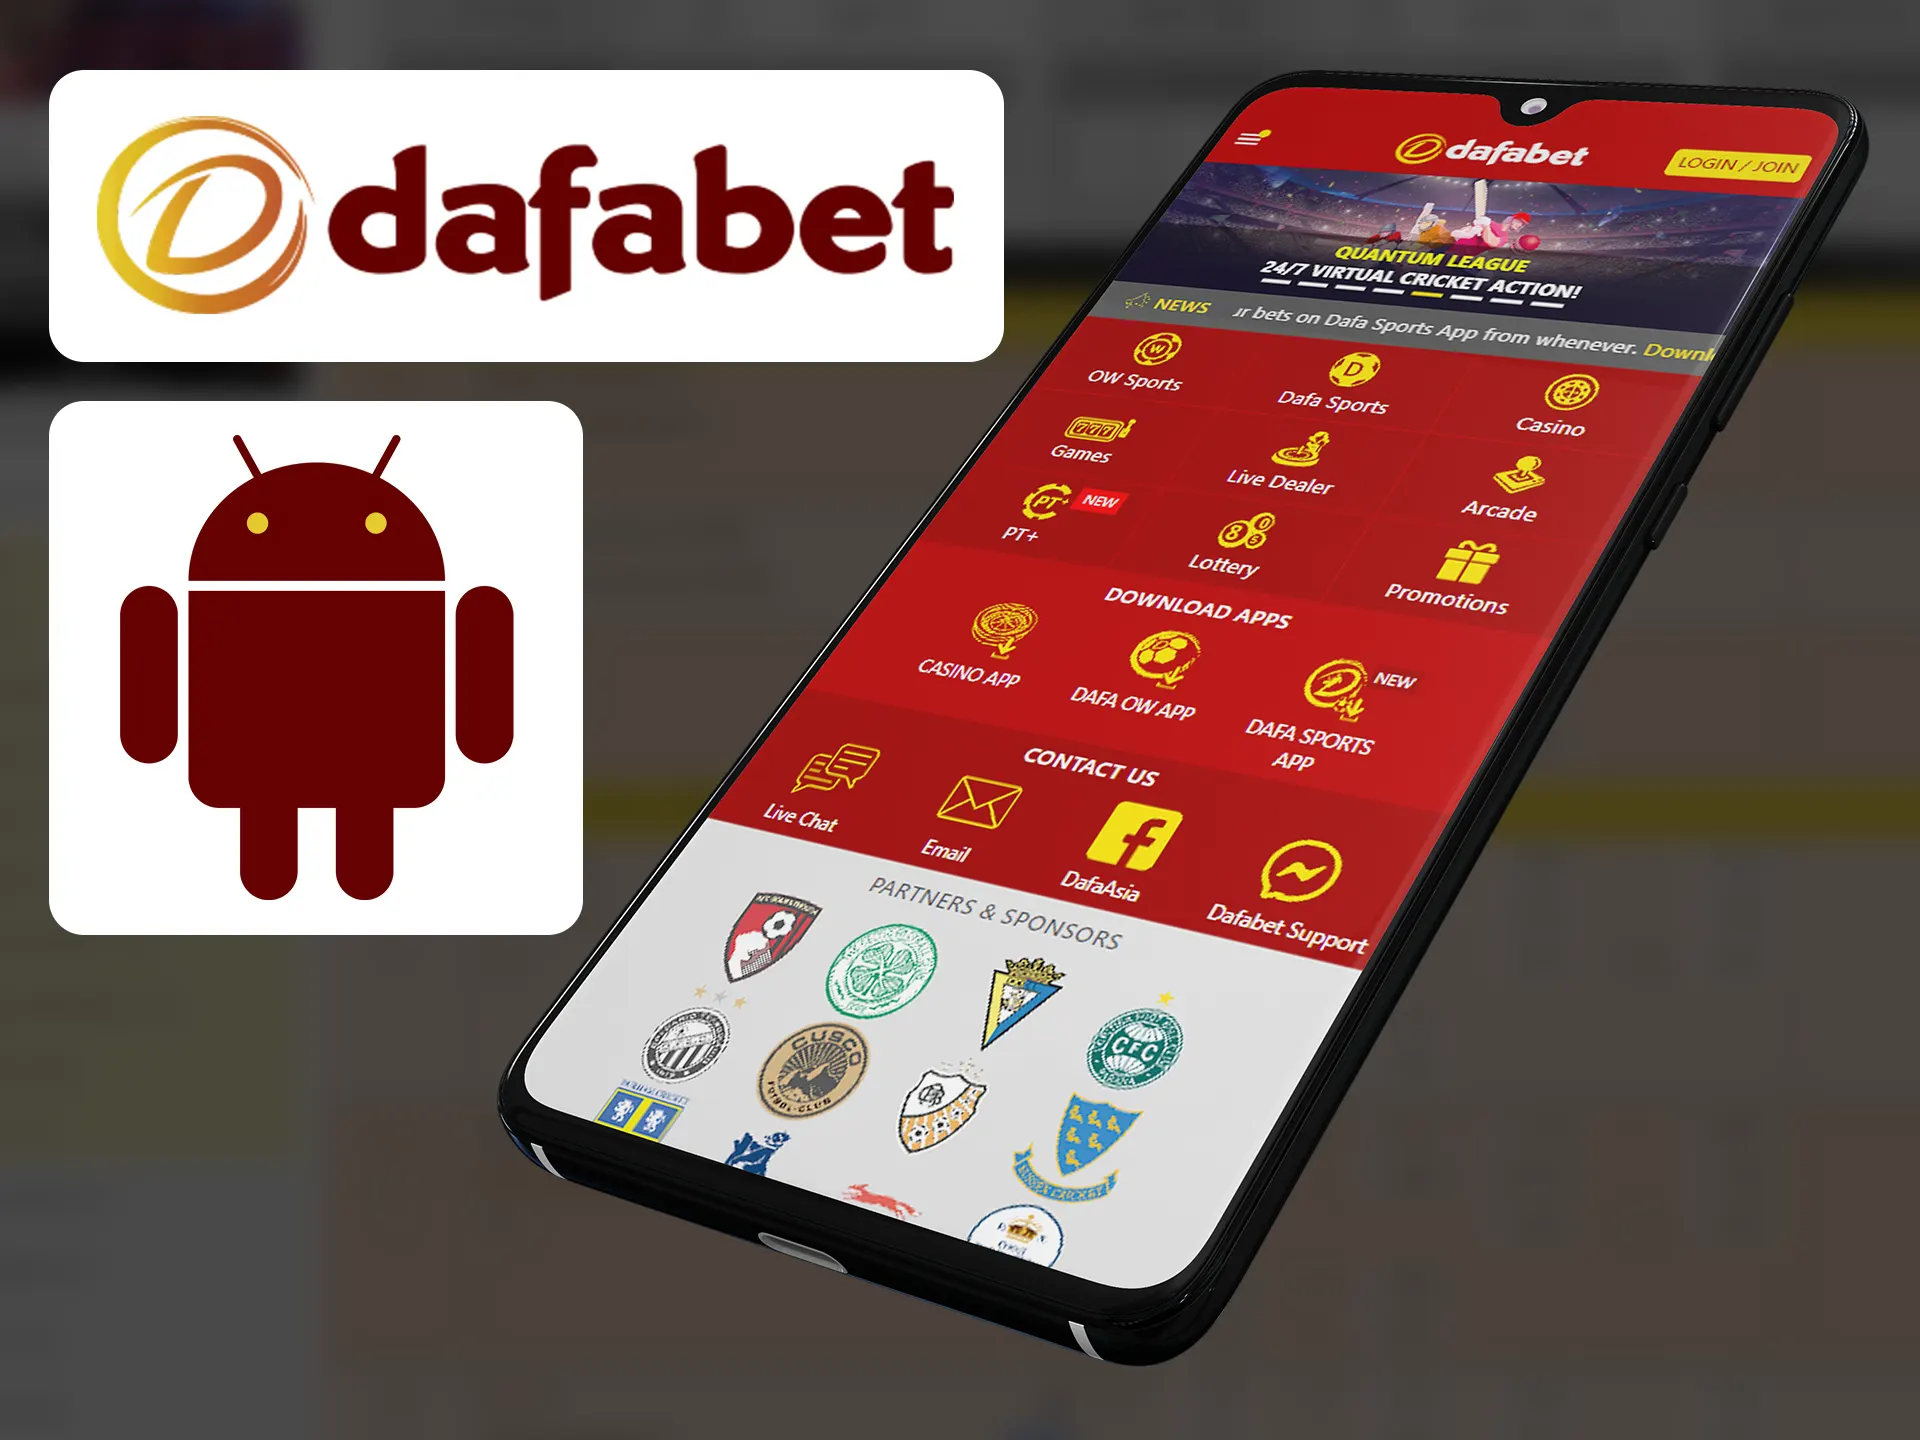 Every Android device can run Dafabet app.